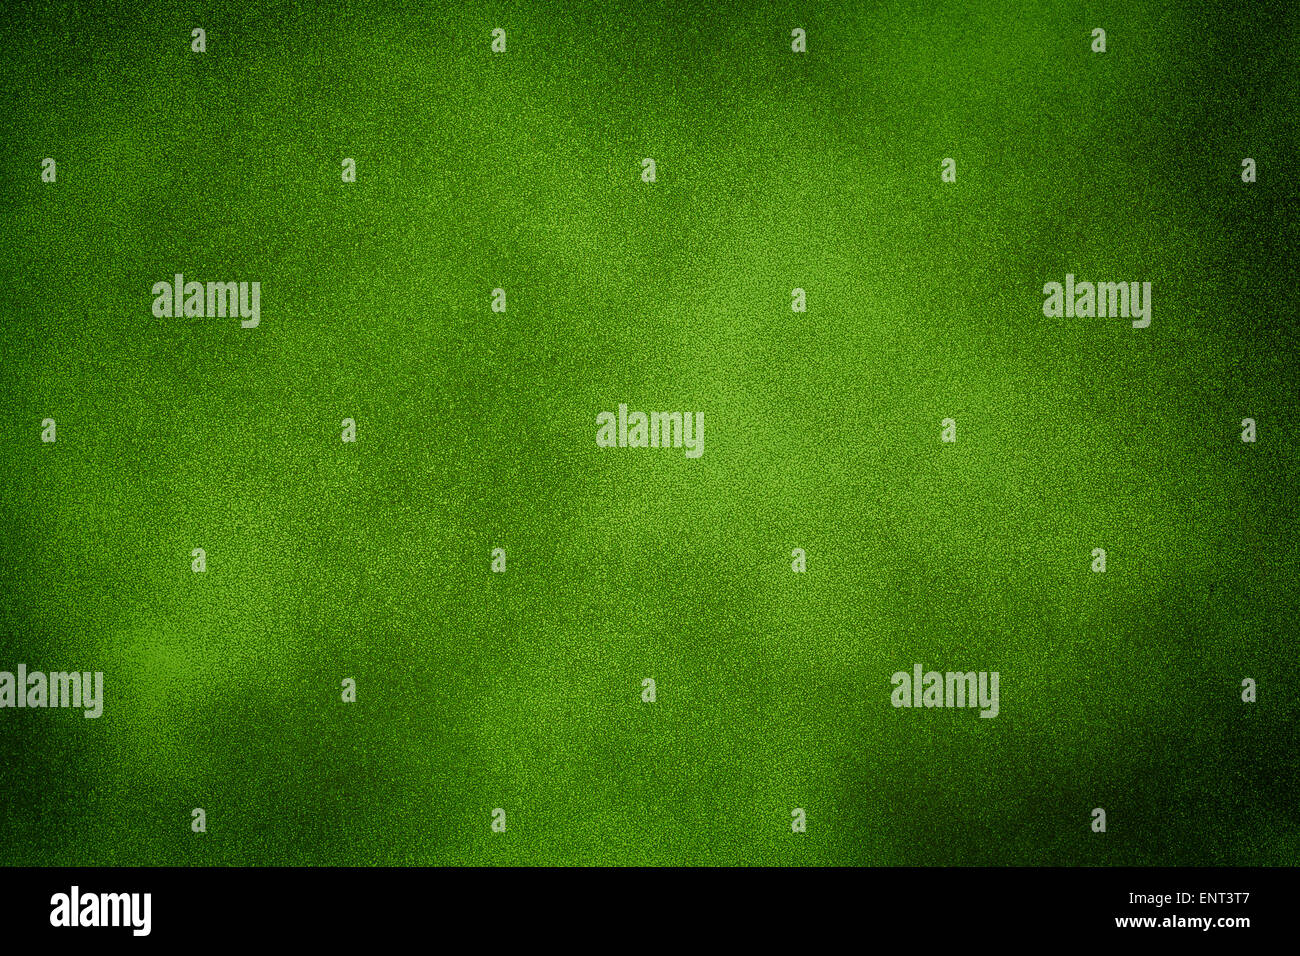 Green grunge wall background with dark spots Stock Photo